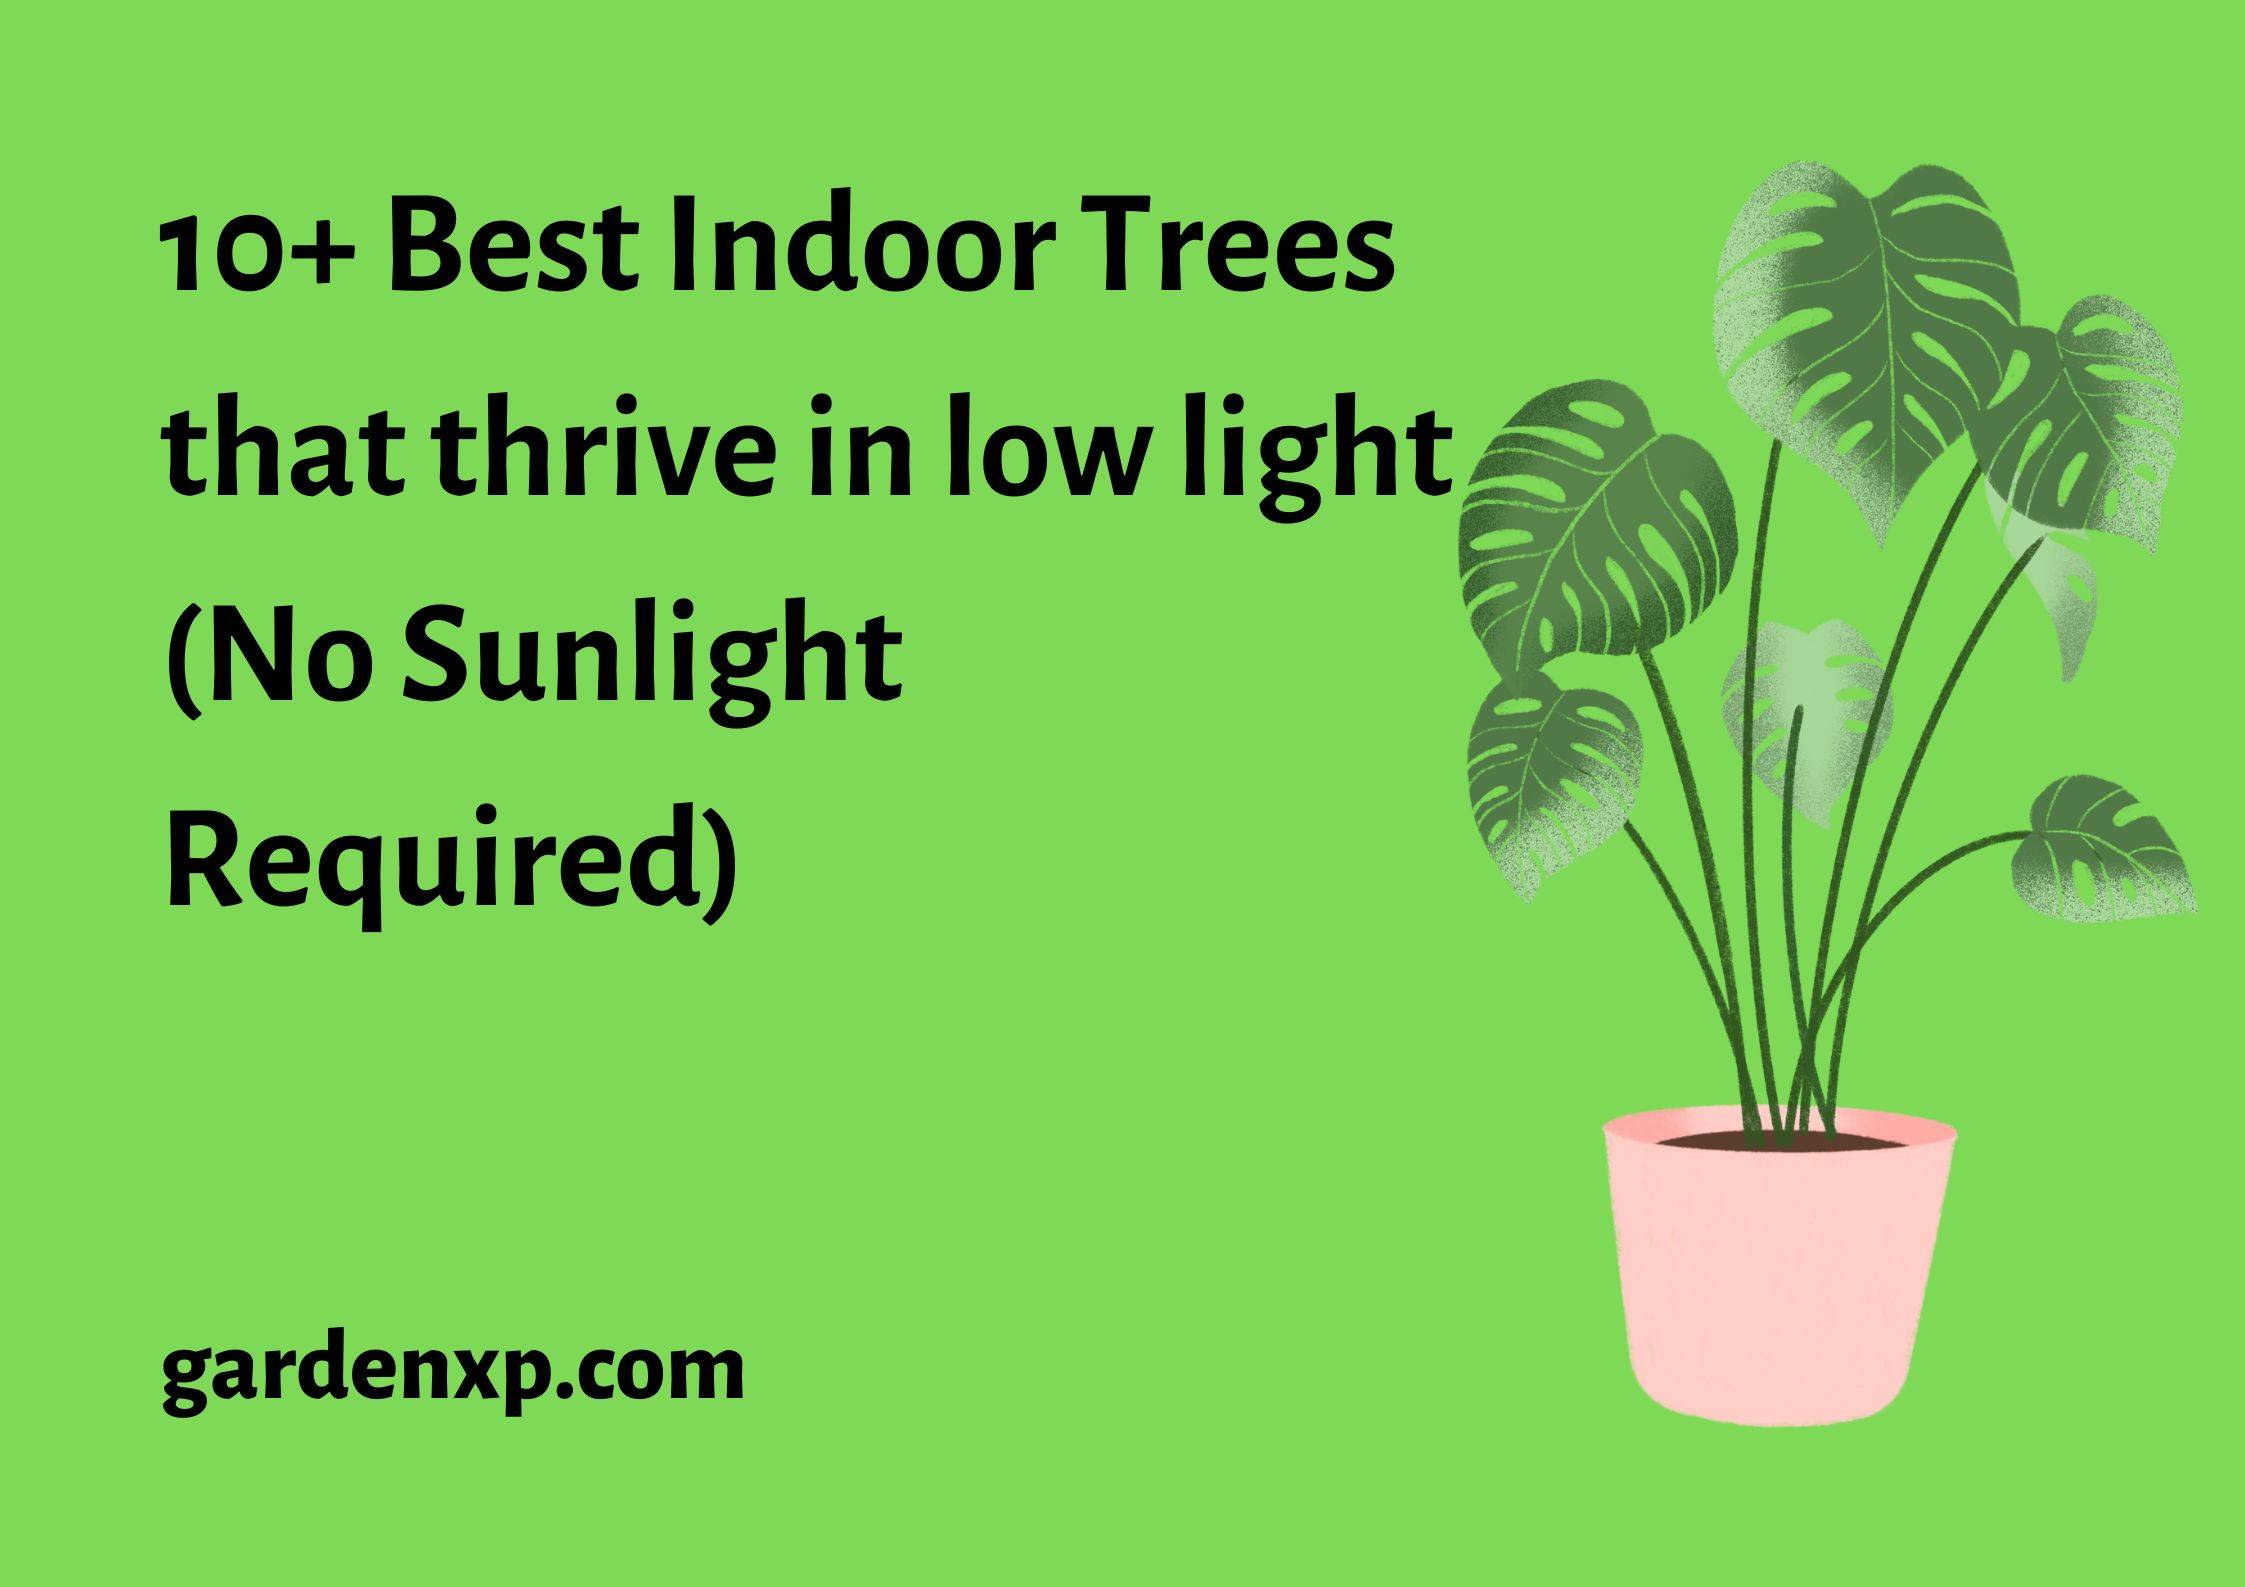 10+ Best Indoor Trees that thrive in low light (No Sunlight Required)